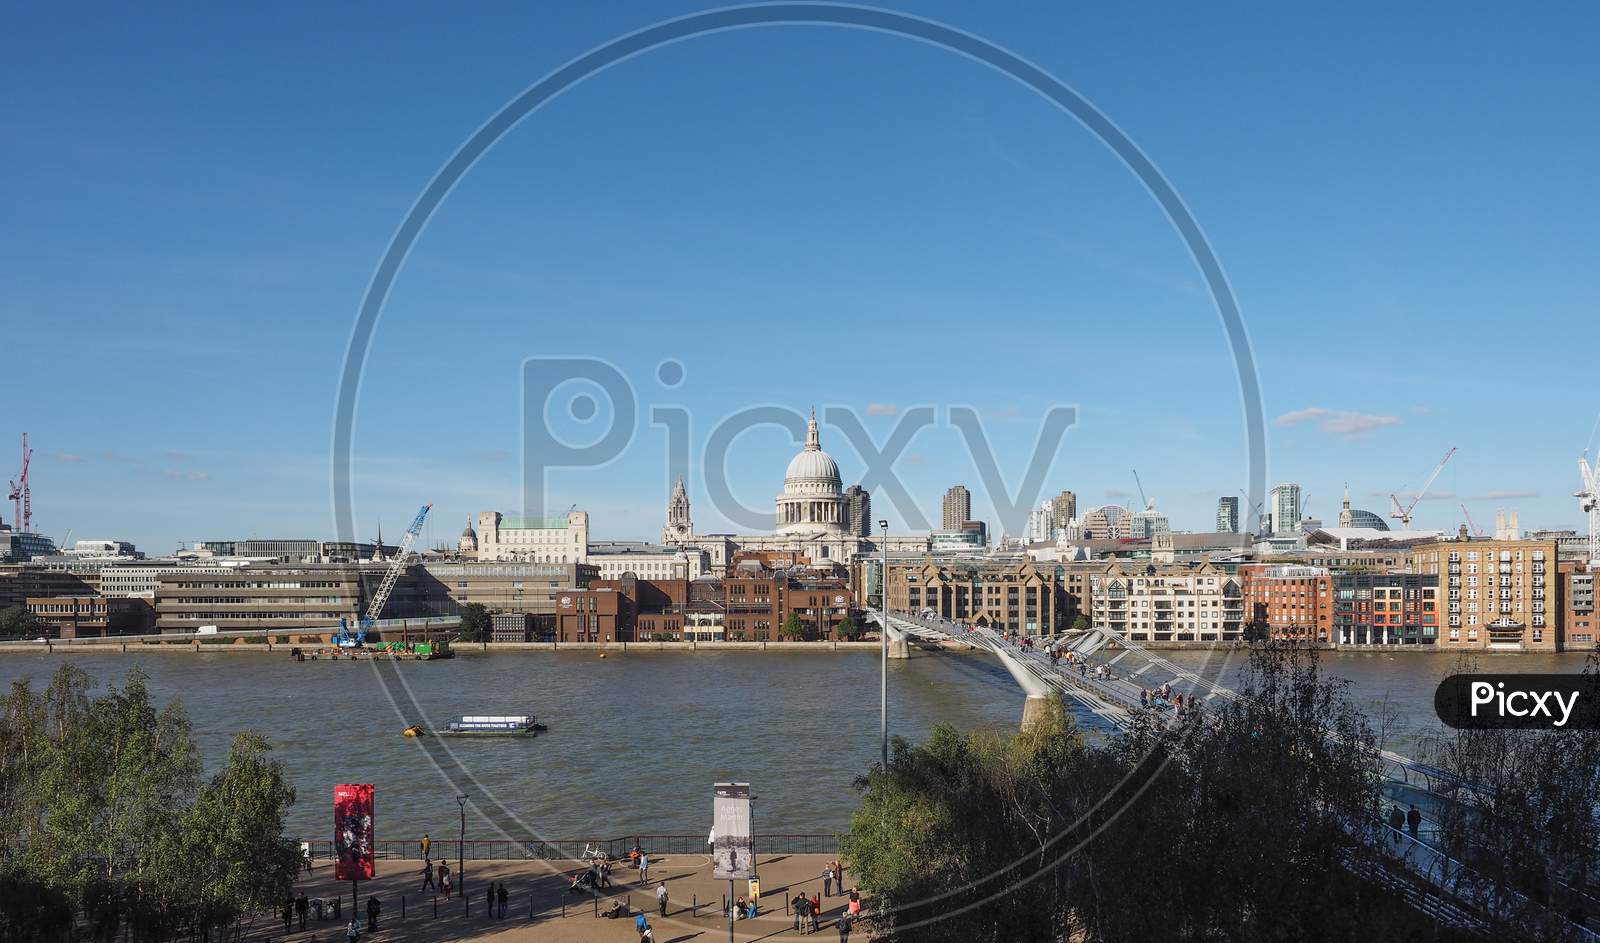 London, Uk - September 28, 2015: People Crossing The Millennium Bridge Over River Thames Linking The City Of London With The South Bank Between St Paul Cathedral And Tate Modern Art Gallery